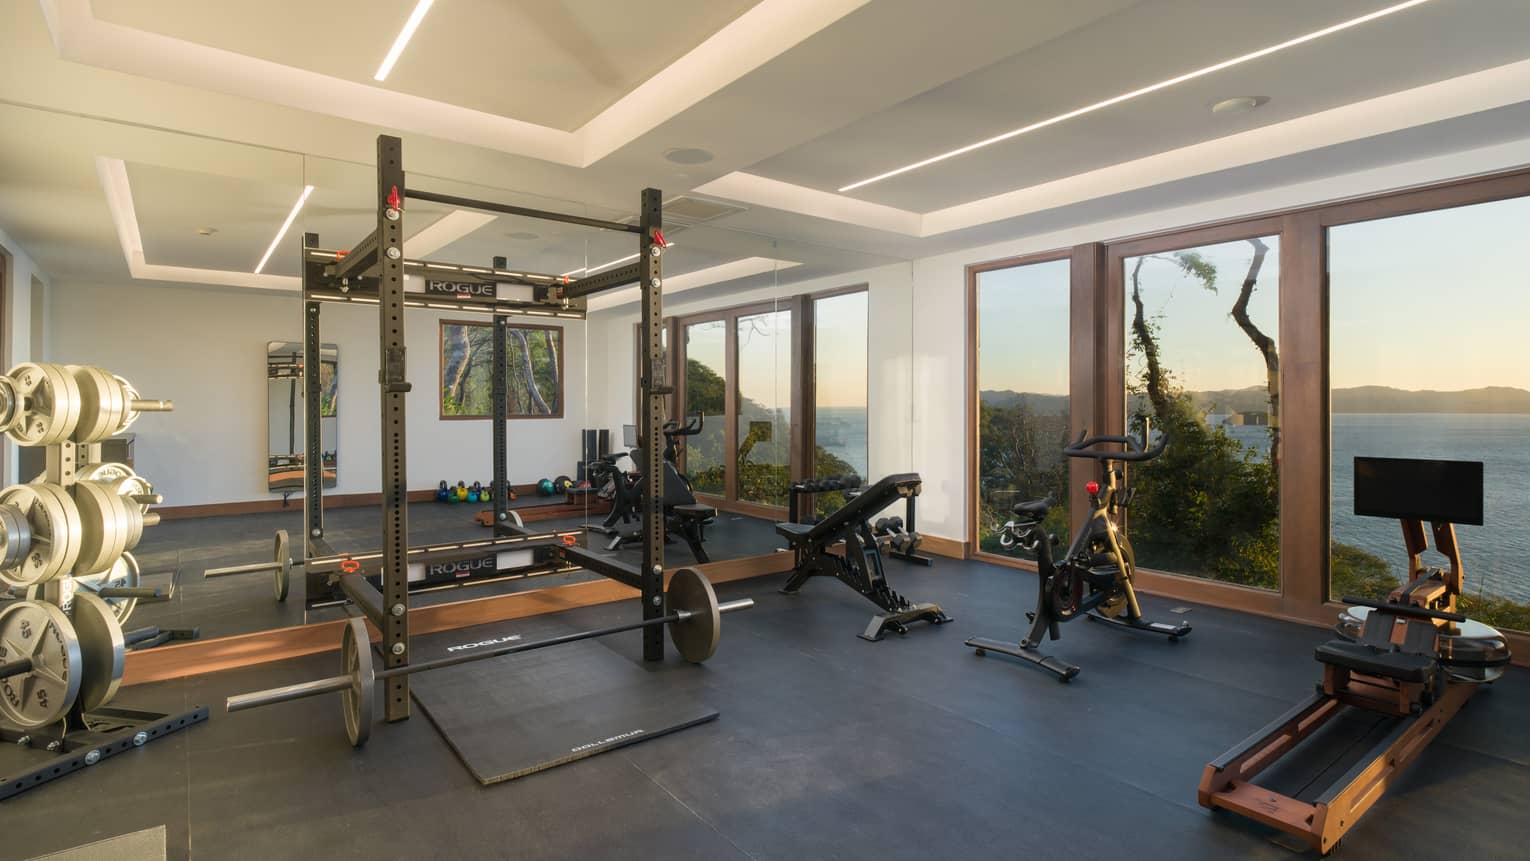 Indoor gym with weights, bike and rower